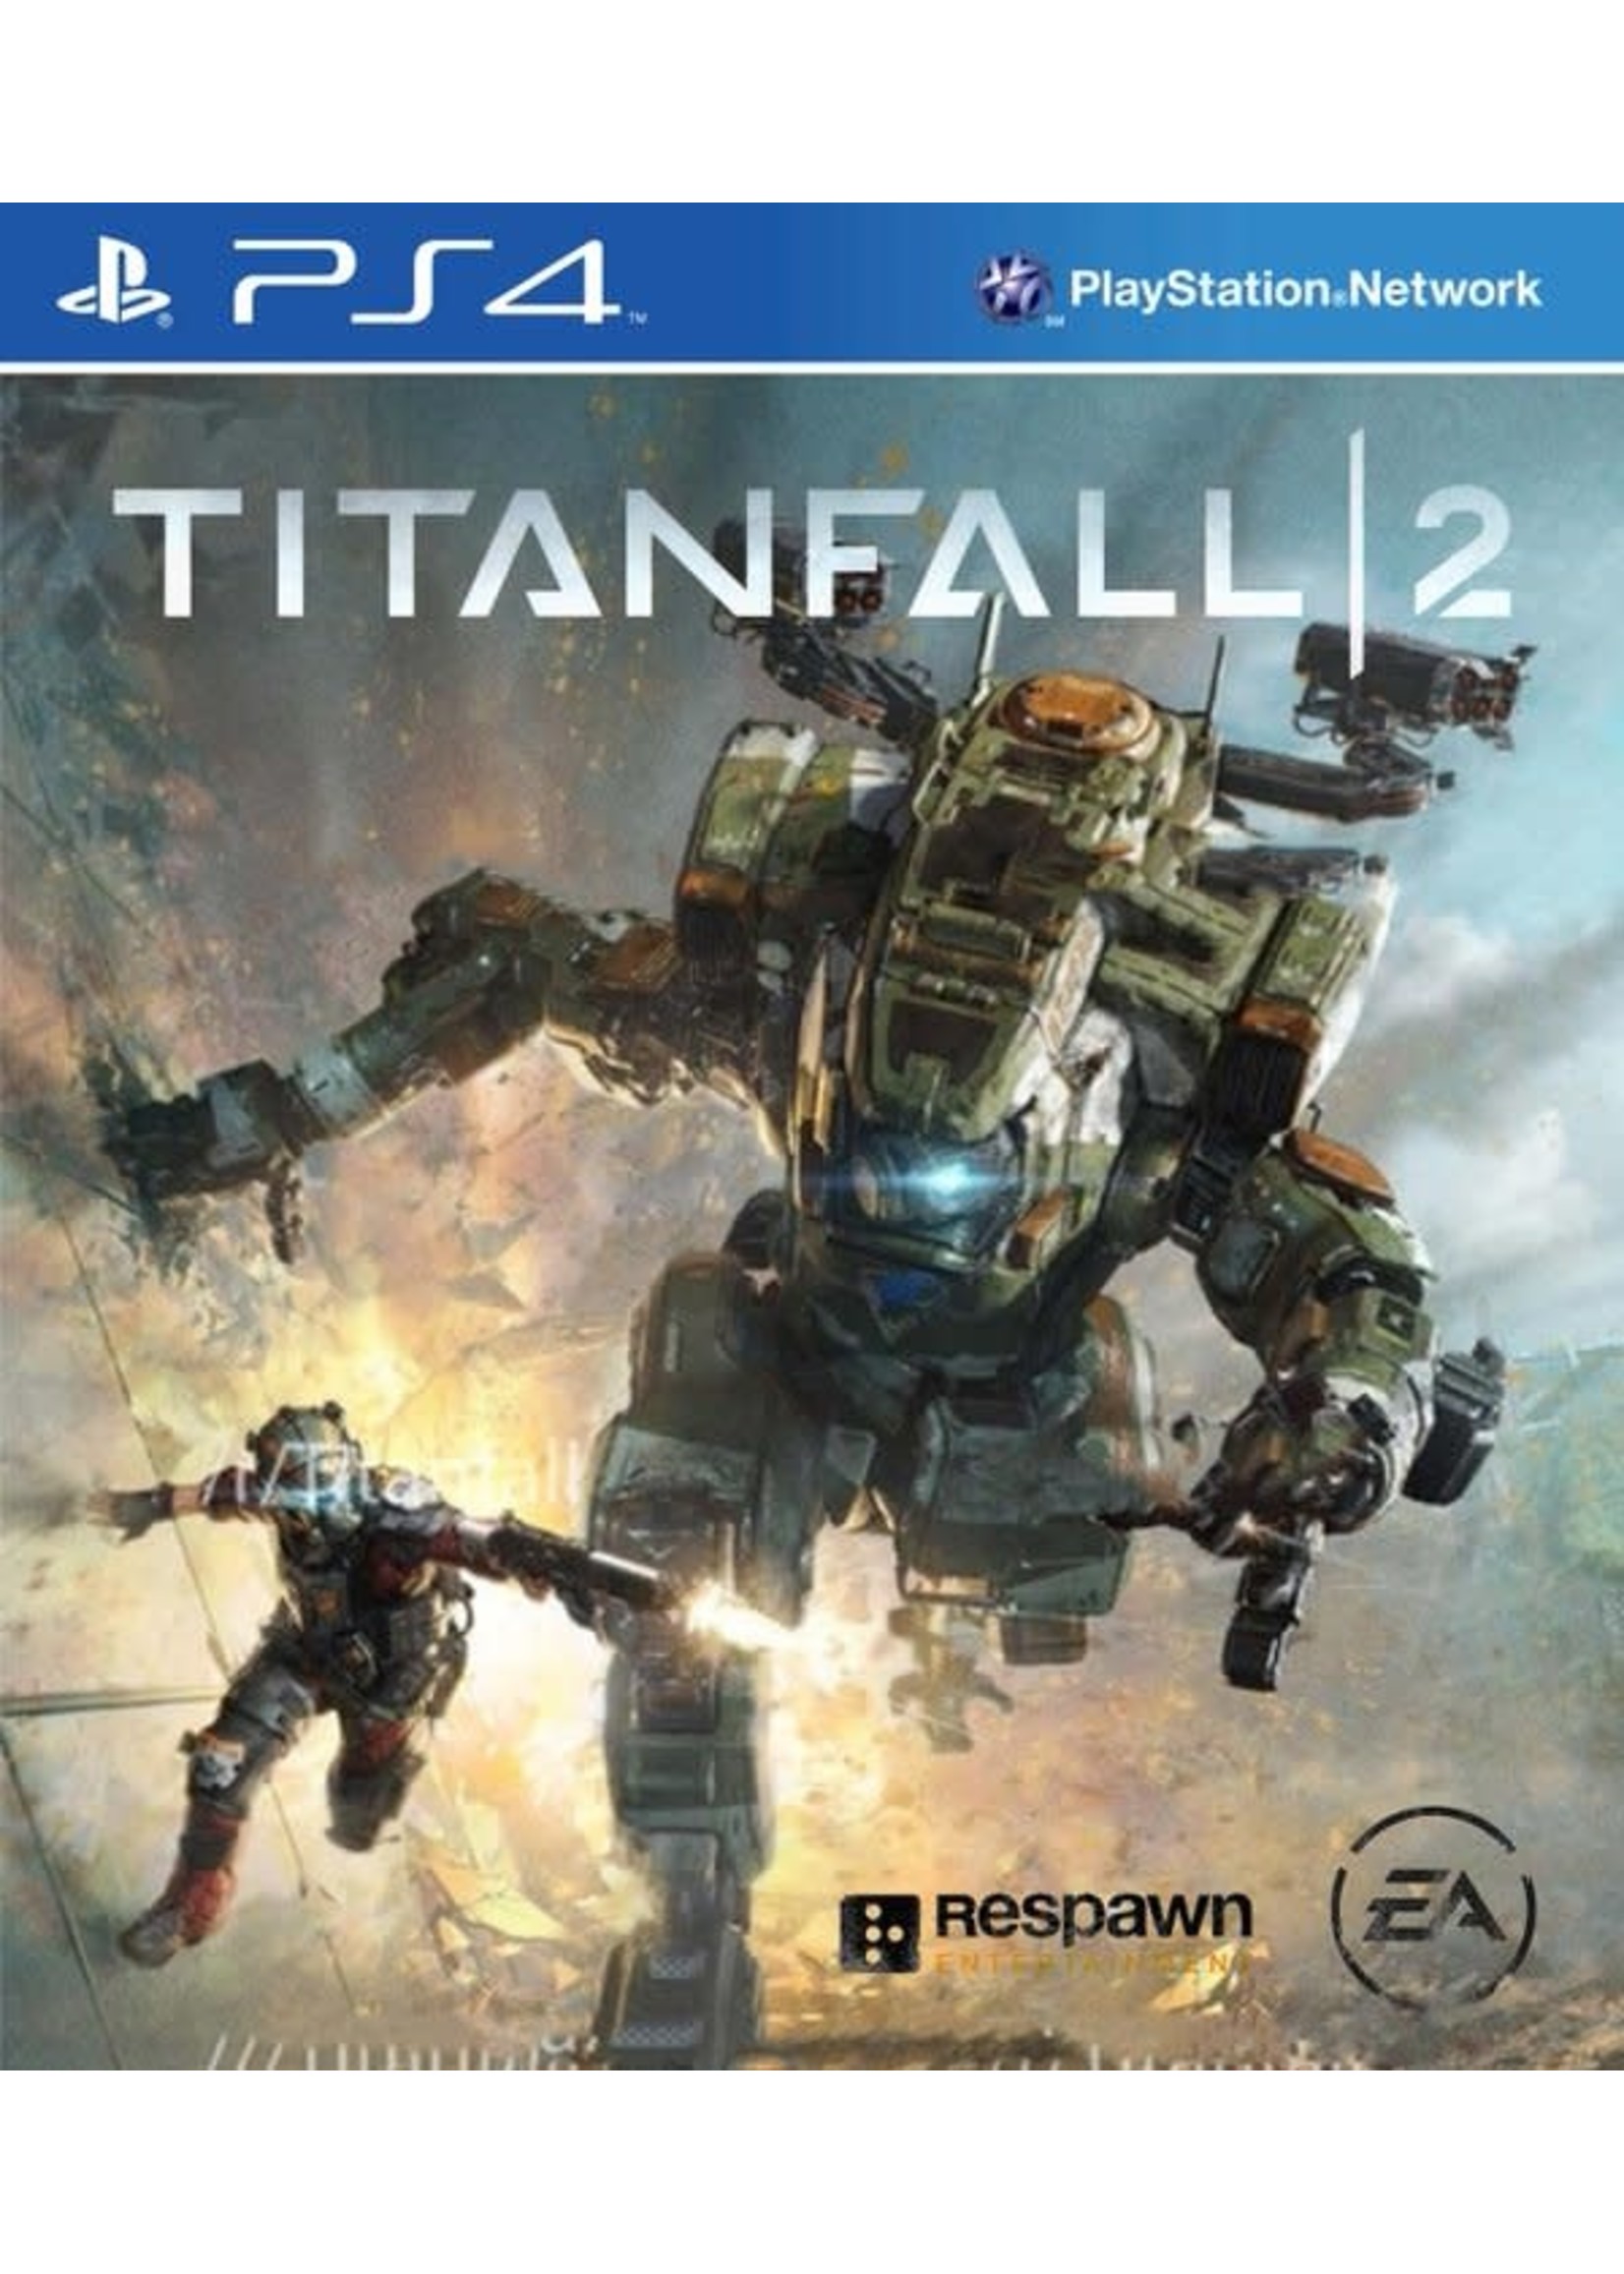 Sony Playstation 4 (PS4) Titanfall 2